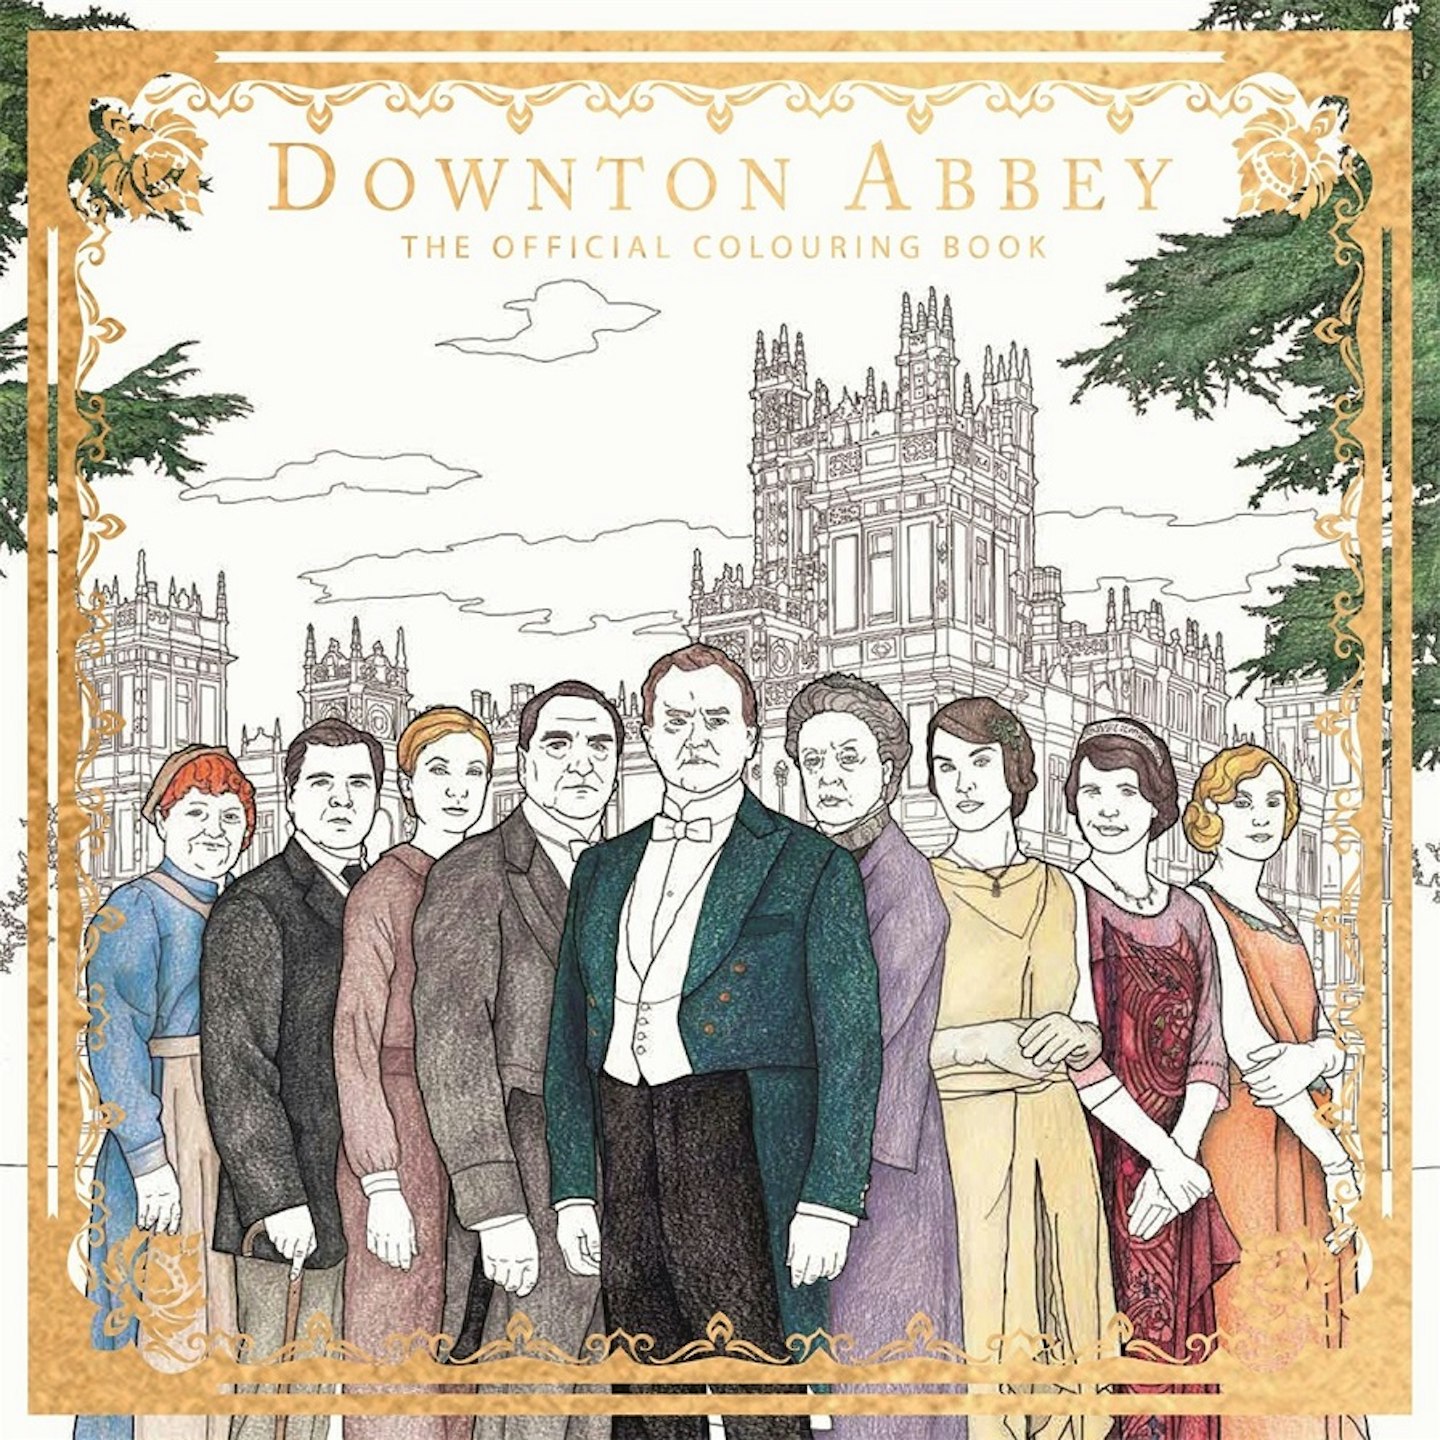 Downton Abbey: The Official Colouring Book, 8.98